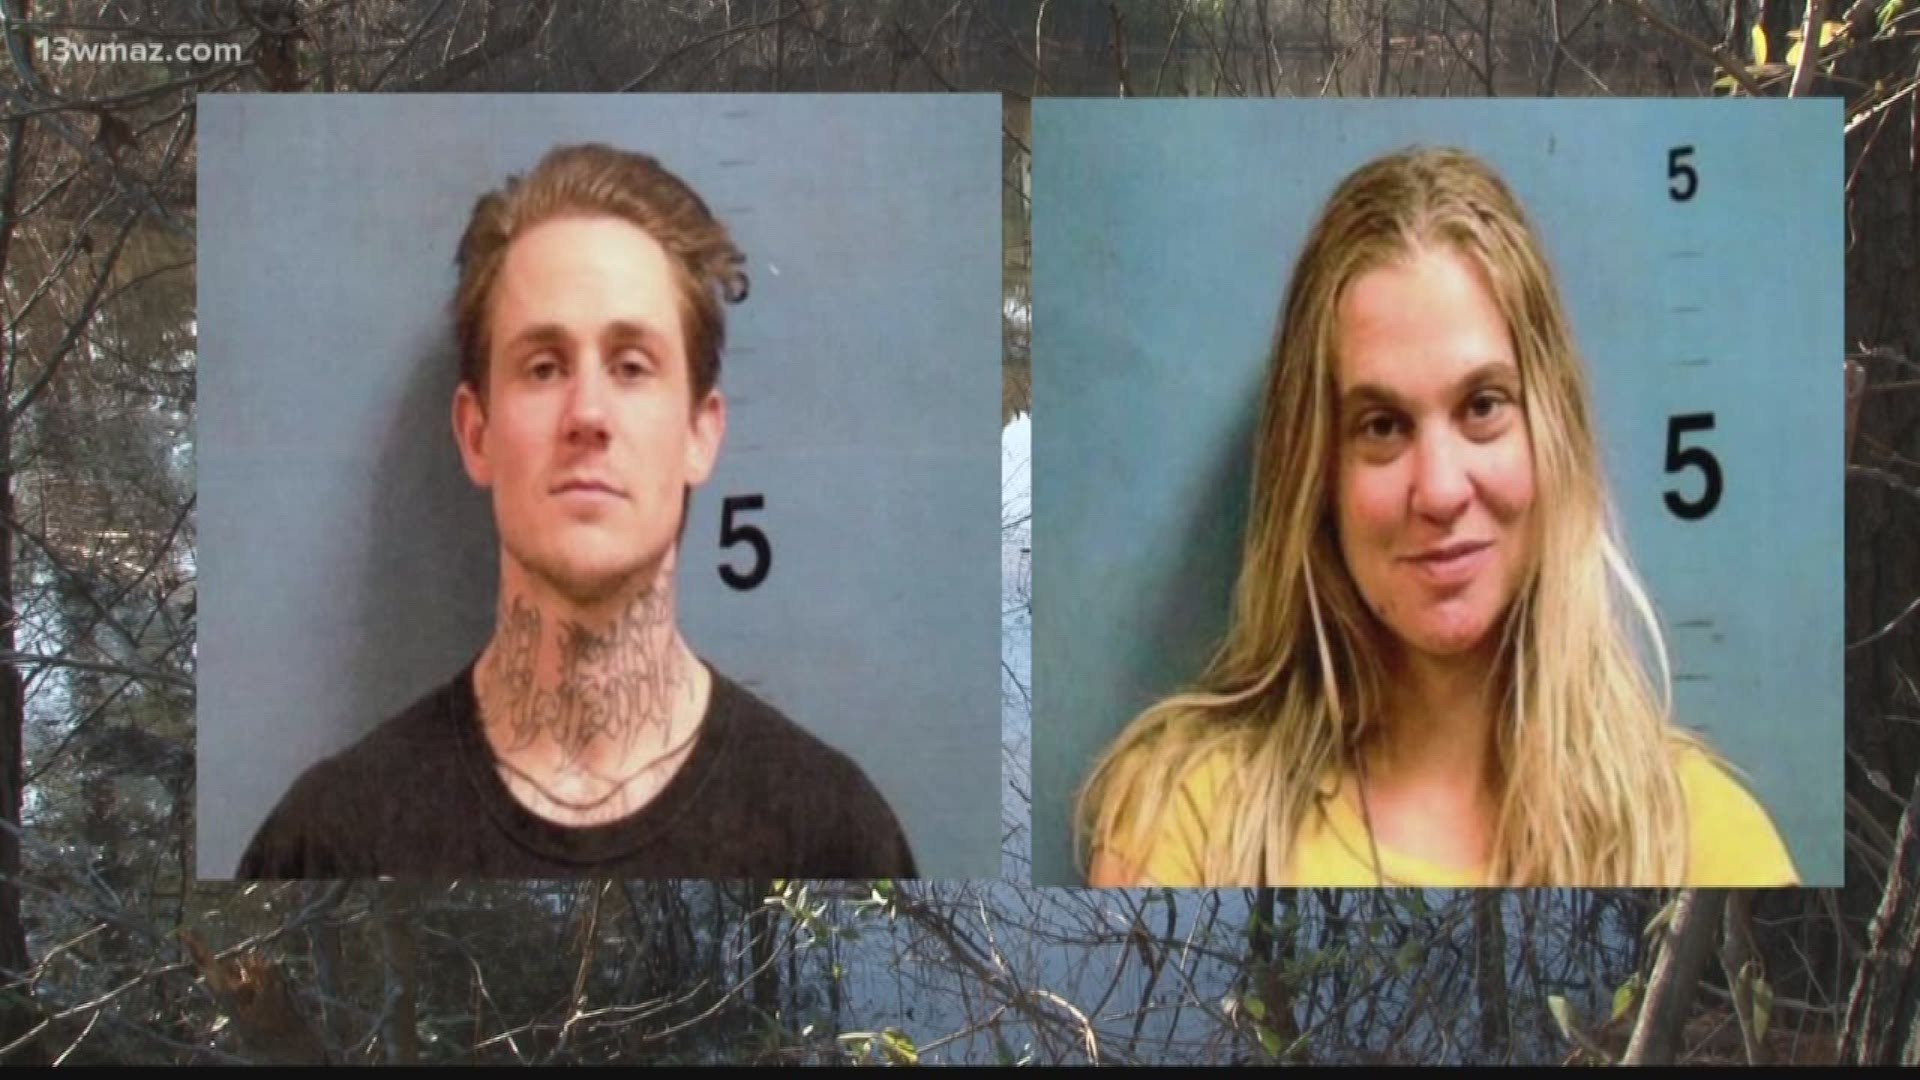 Neighbors relieved after Wyoming fugitives captured in Monroe County